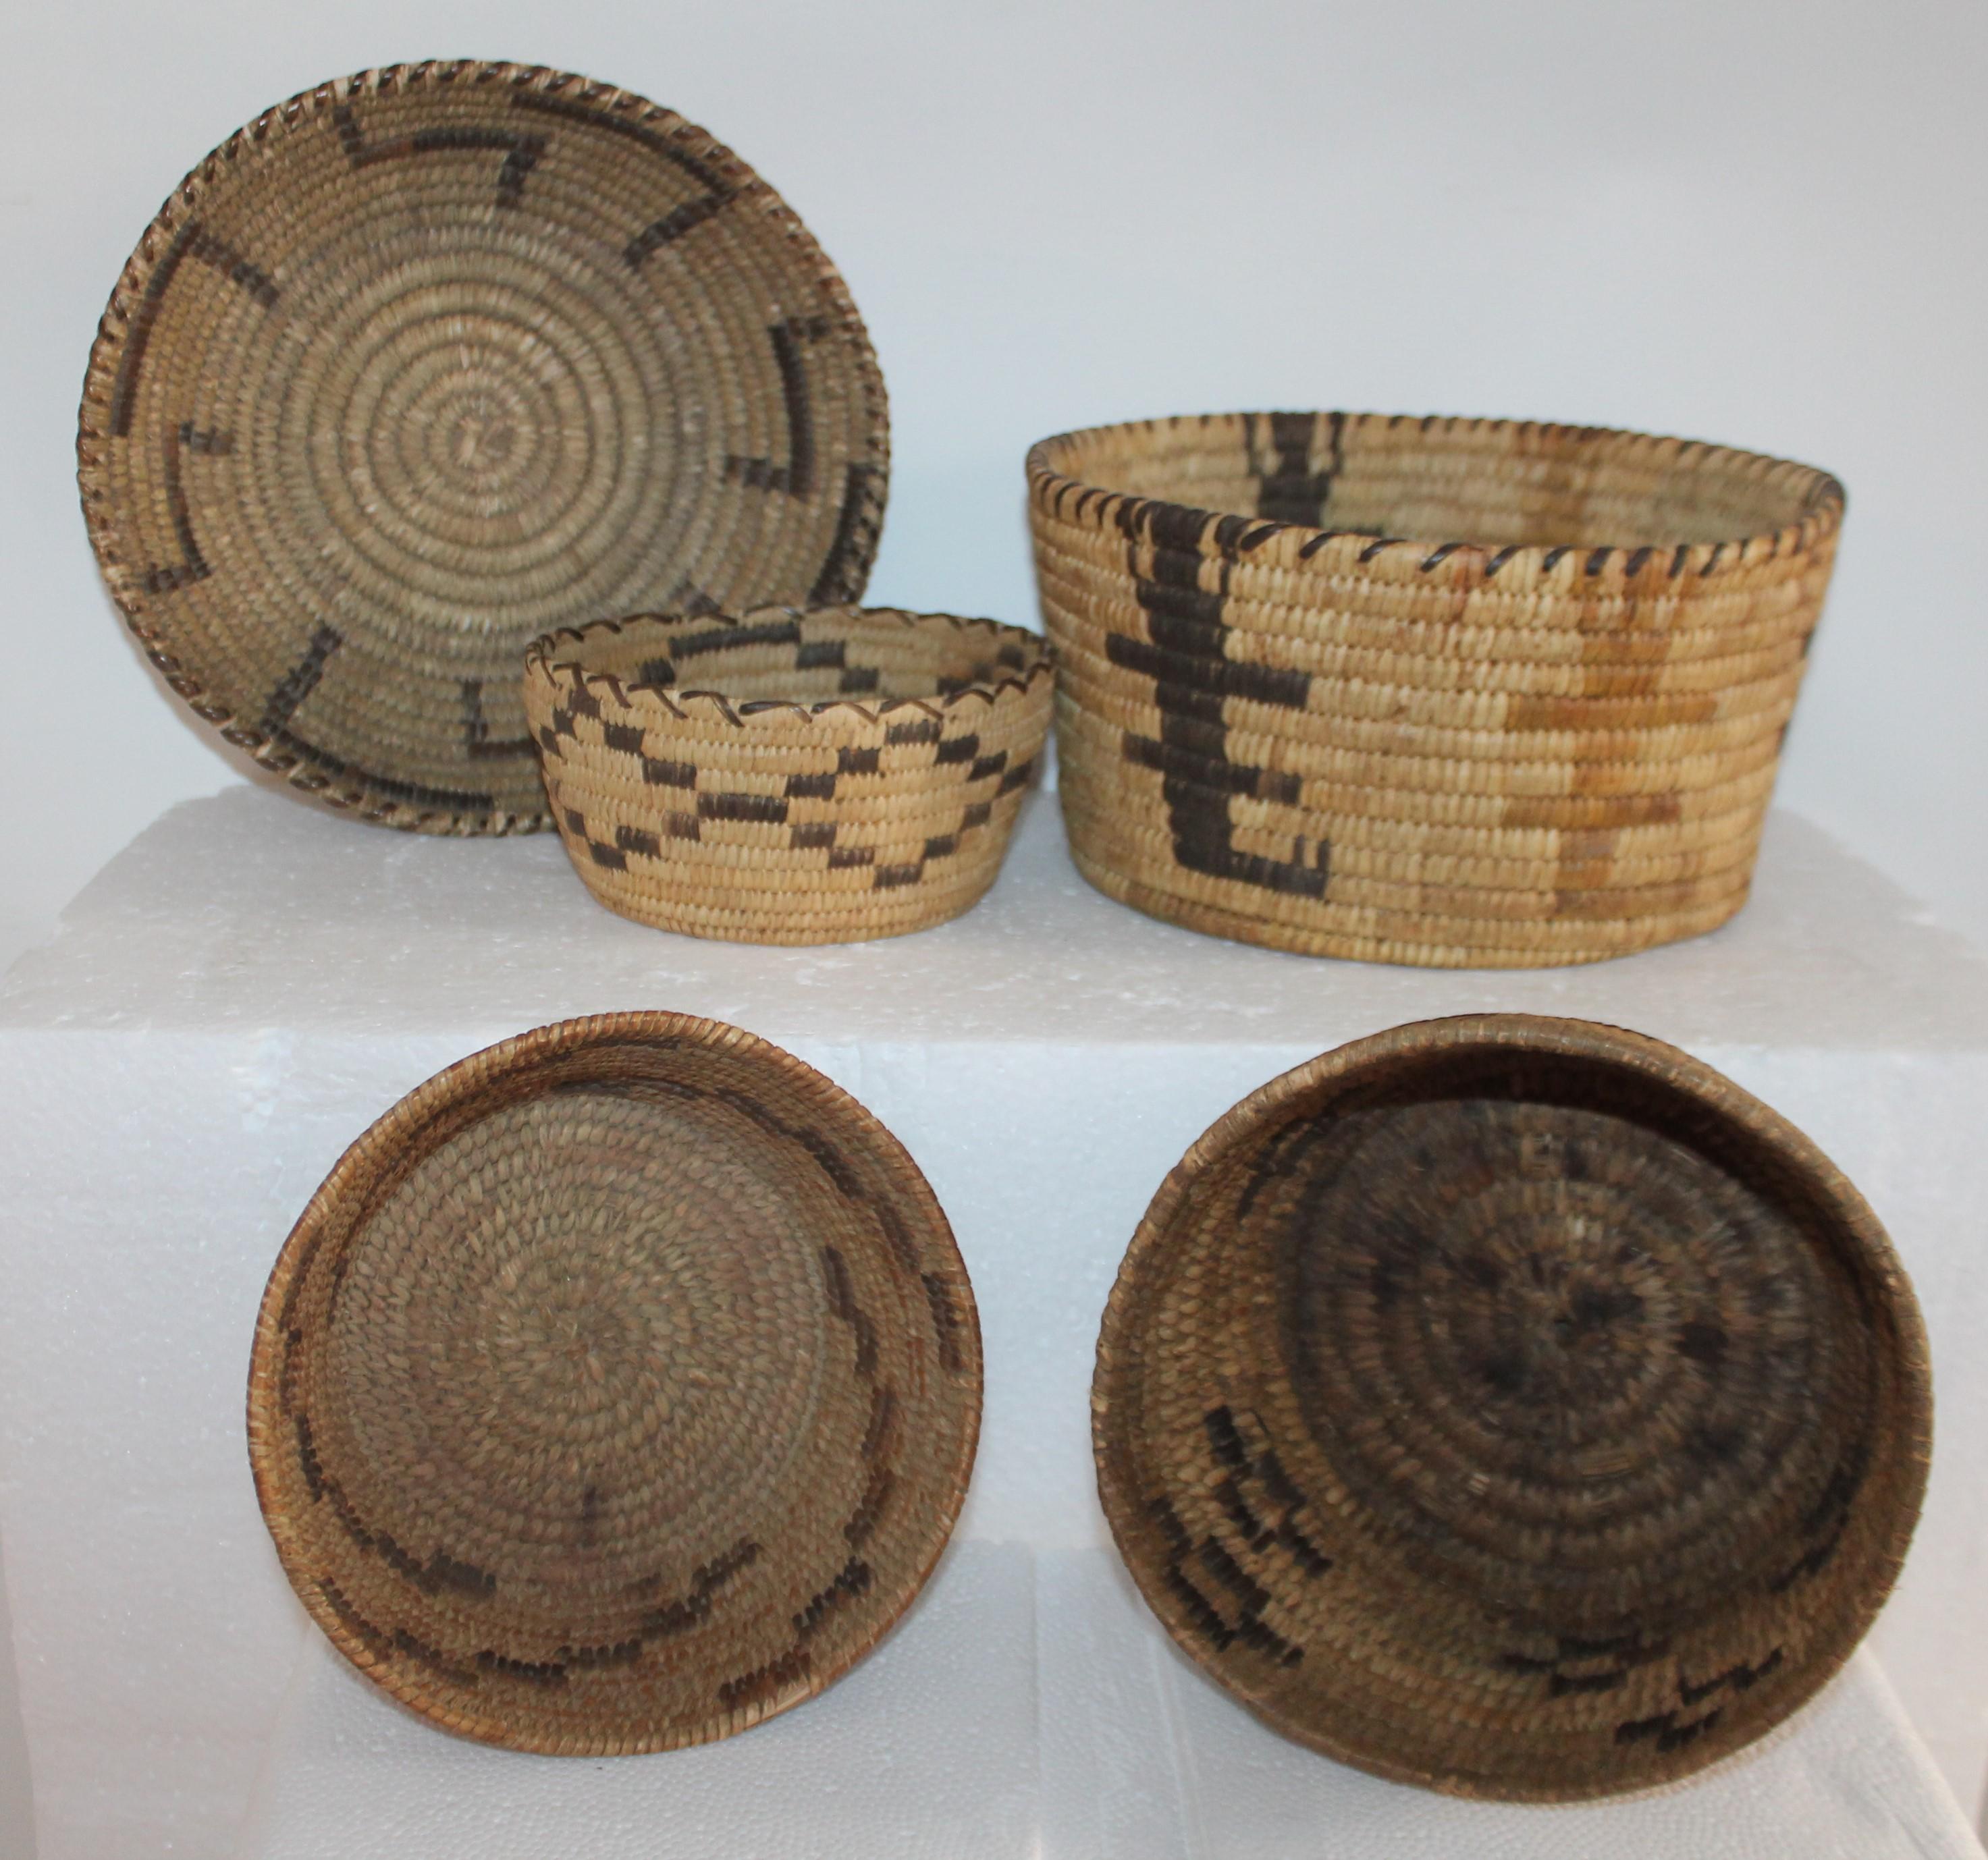 These mixed Pima & Papago baskets all in very good condition. The collection of five baskets are sold as a group.

Largest basket measures 9.5 diameter x 4.5 height
 
smallest basket measures 5.75 x 2.75.